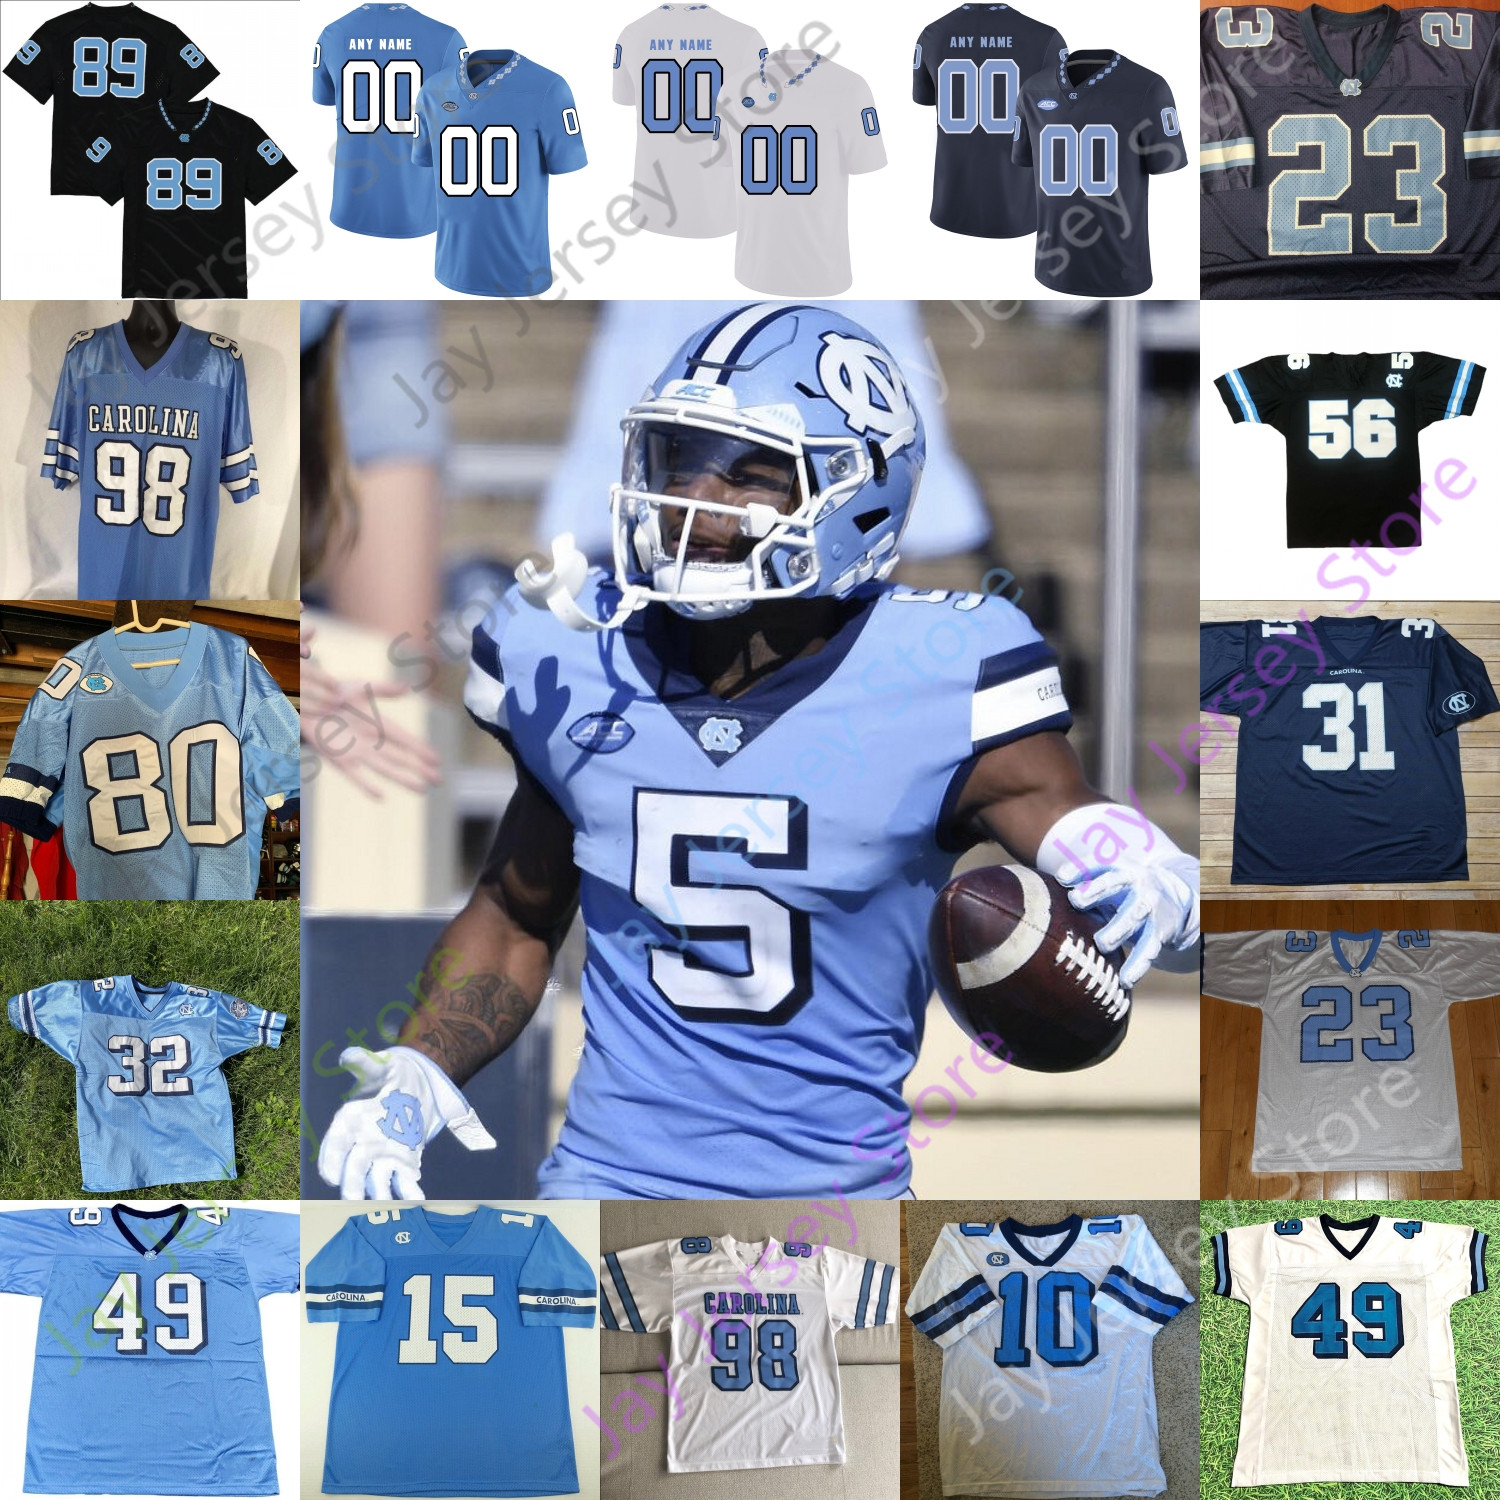 

North Carolina Football Jersey NCAA College Lawrence Taylor Mitchell Trubisky Ryan Switzer JULIUS PEPPERS Sam Howell Carter Williams Brown, Baby blue iv